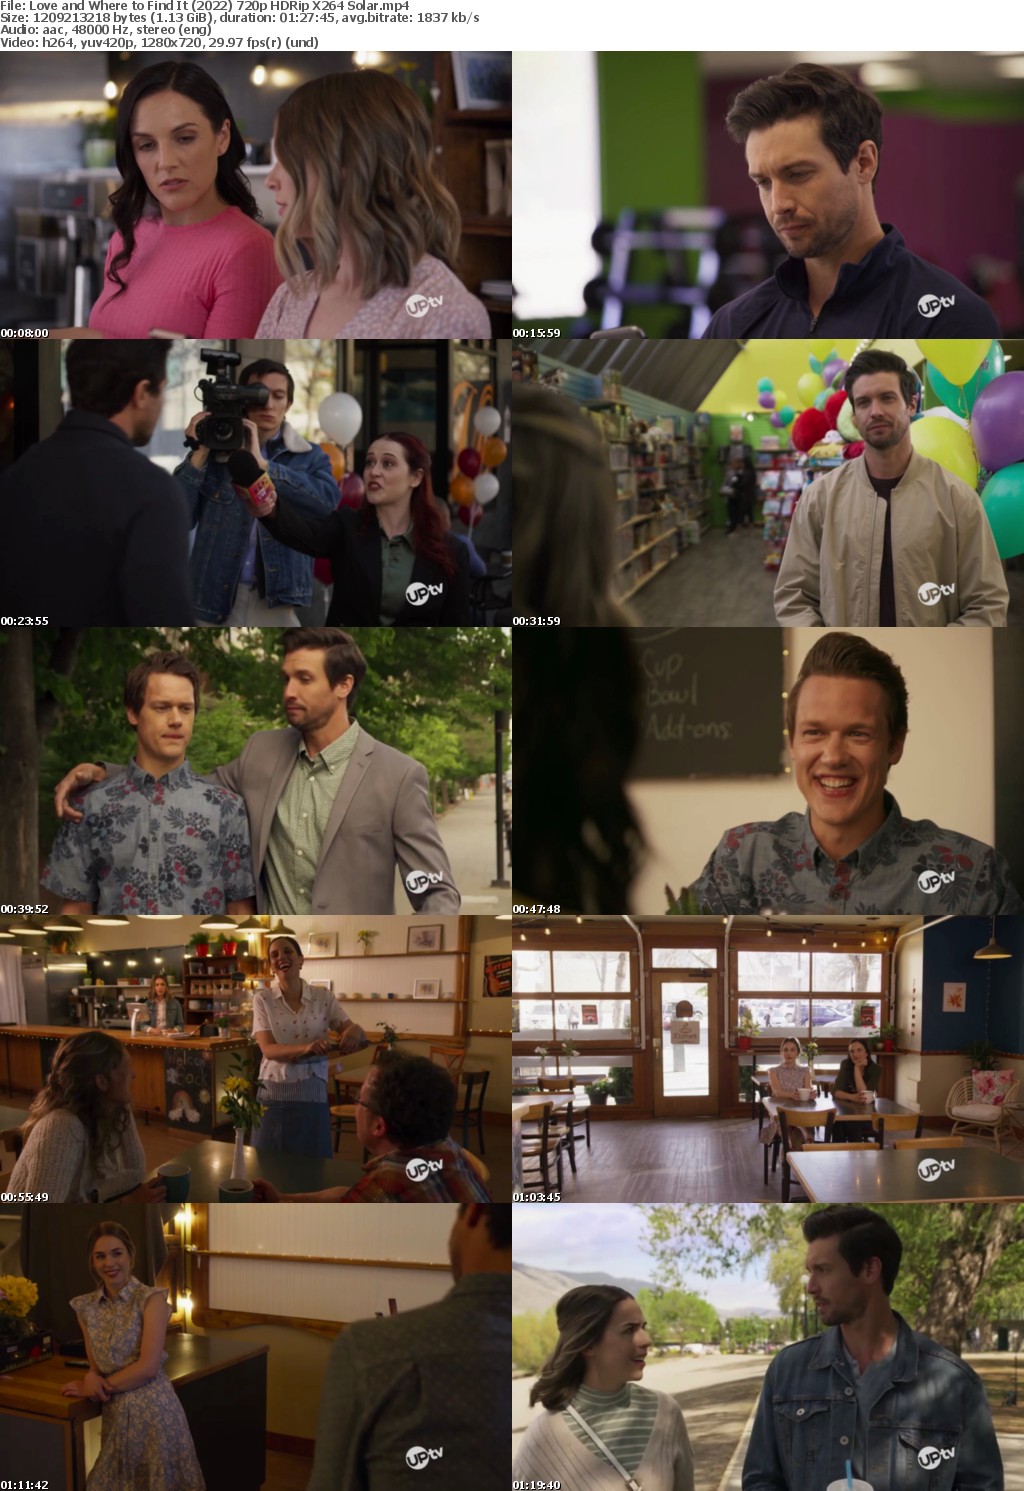 Love and Where to Find It (2022) 720p HDRip X264 Solar